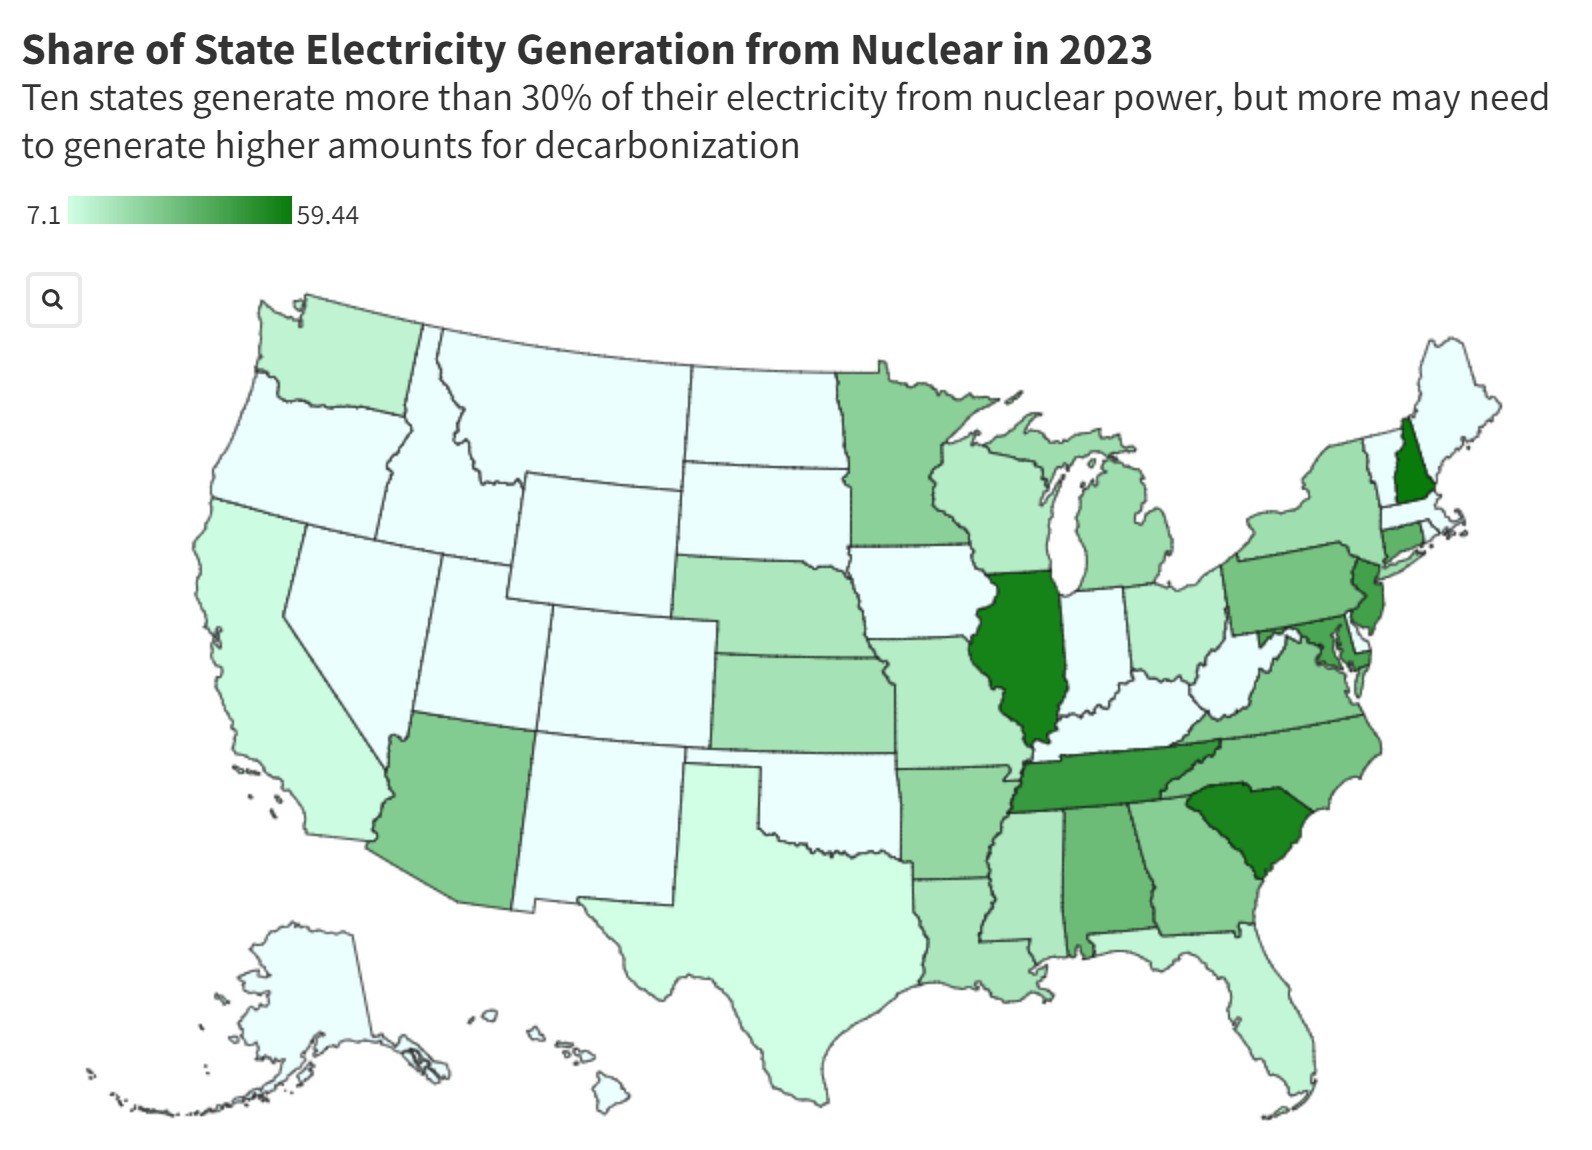 Share of State Electricity Generation from Nuclear in 2023